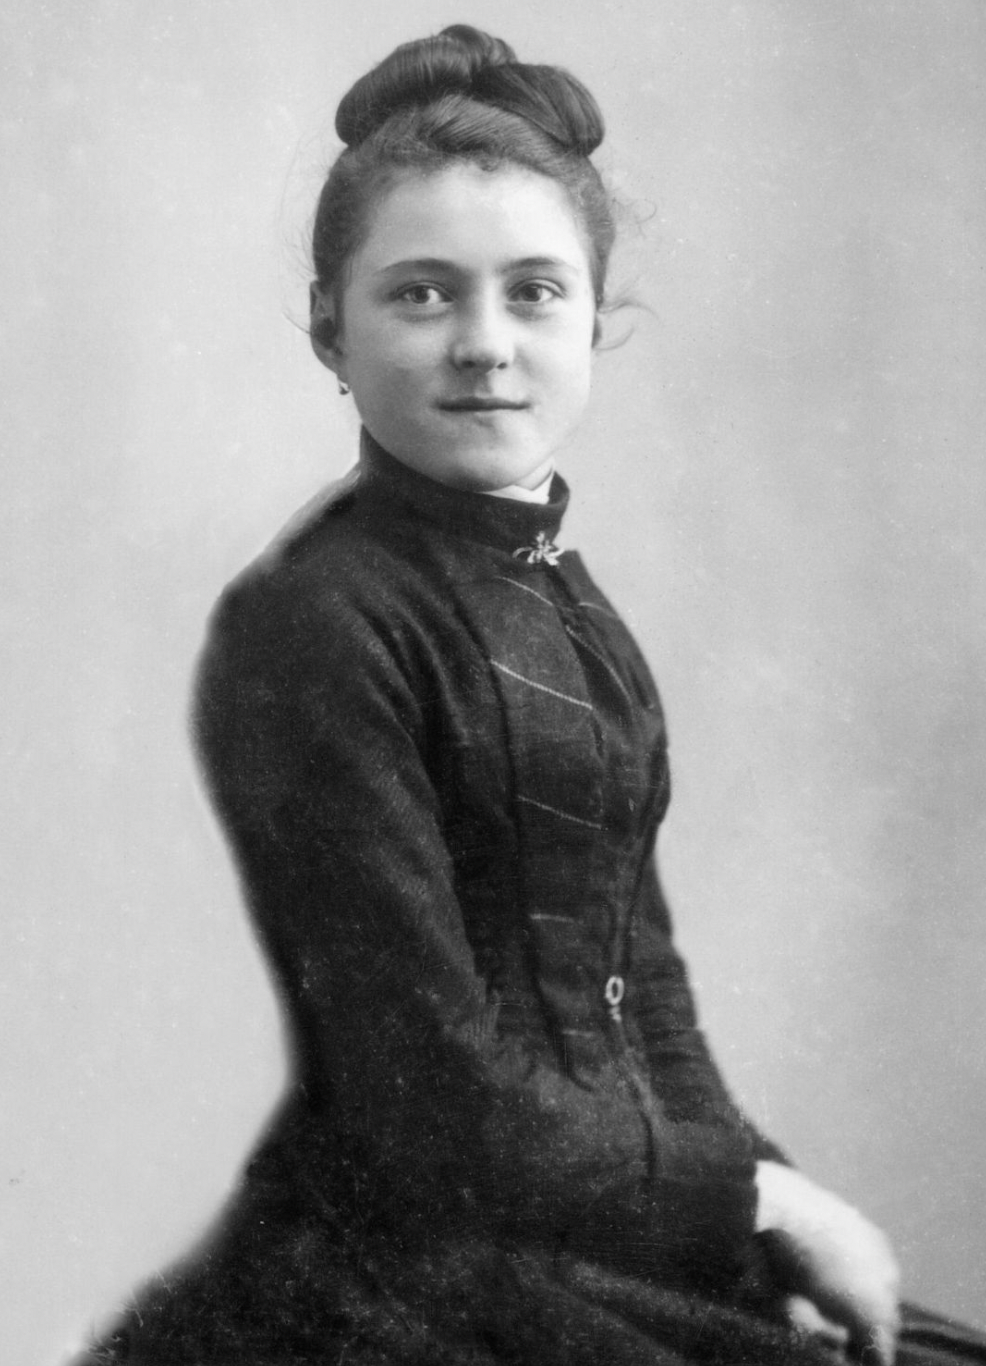 Saint Stories: St. Therese of Lisieux